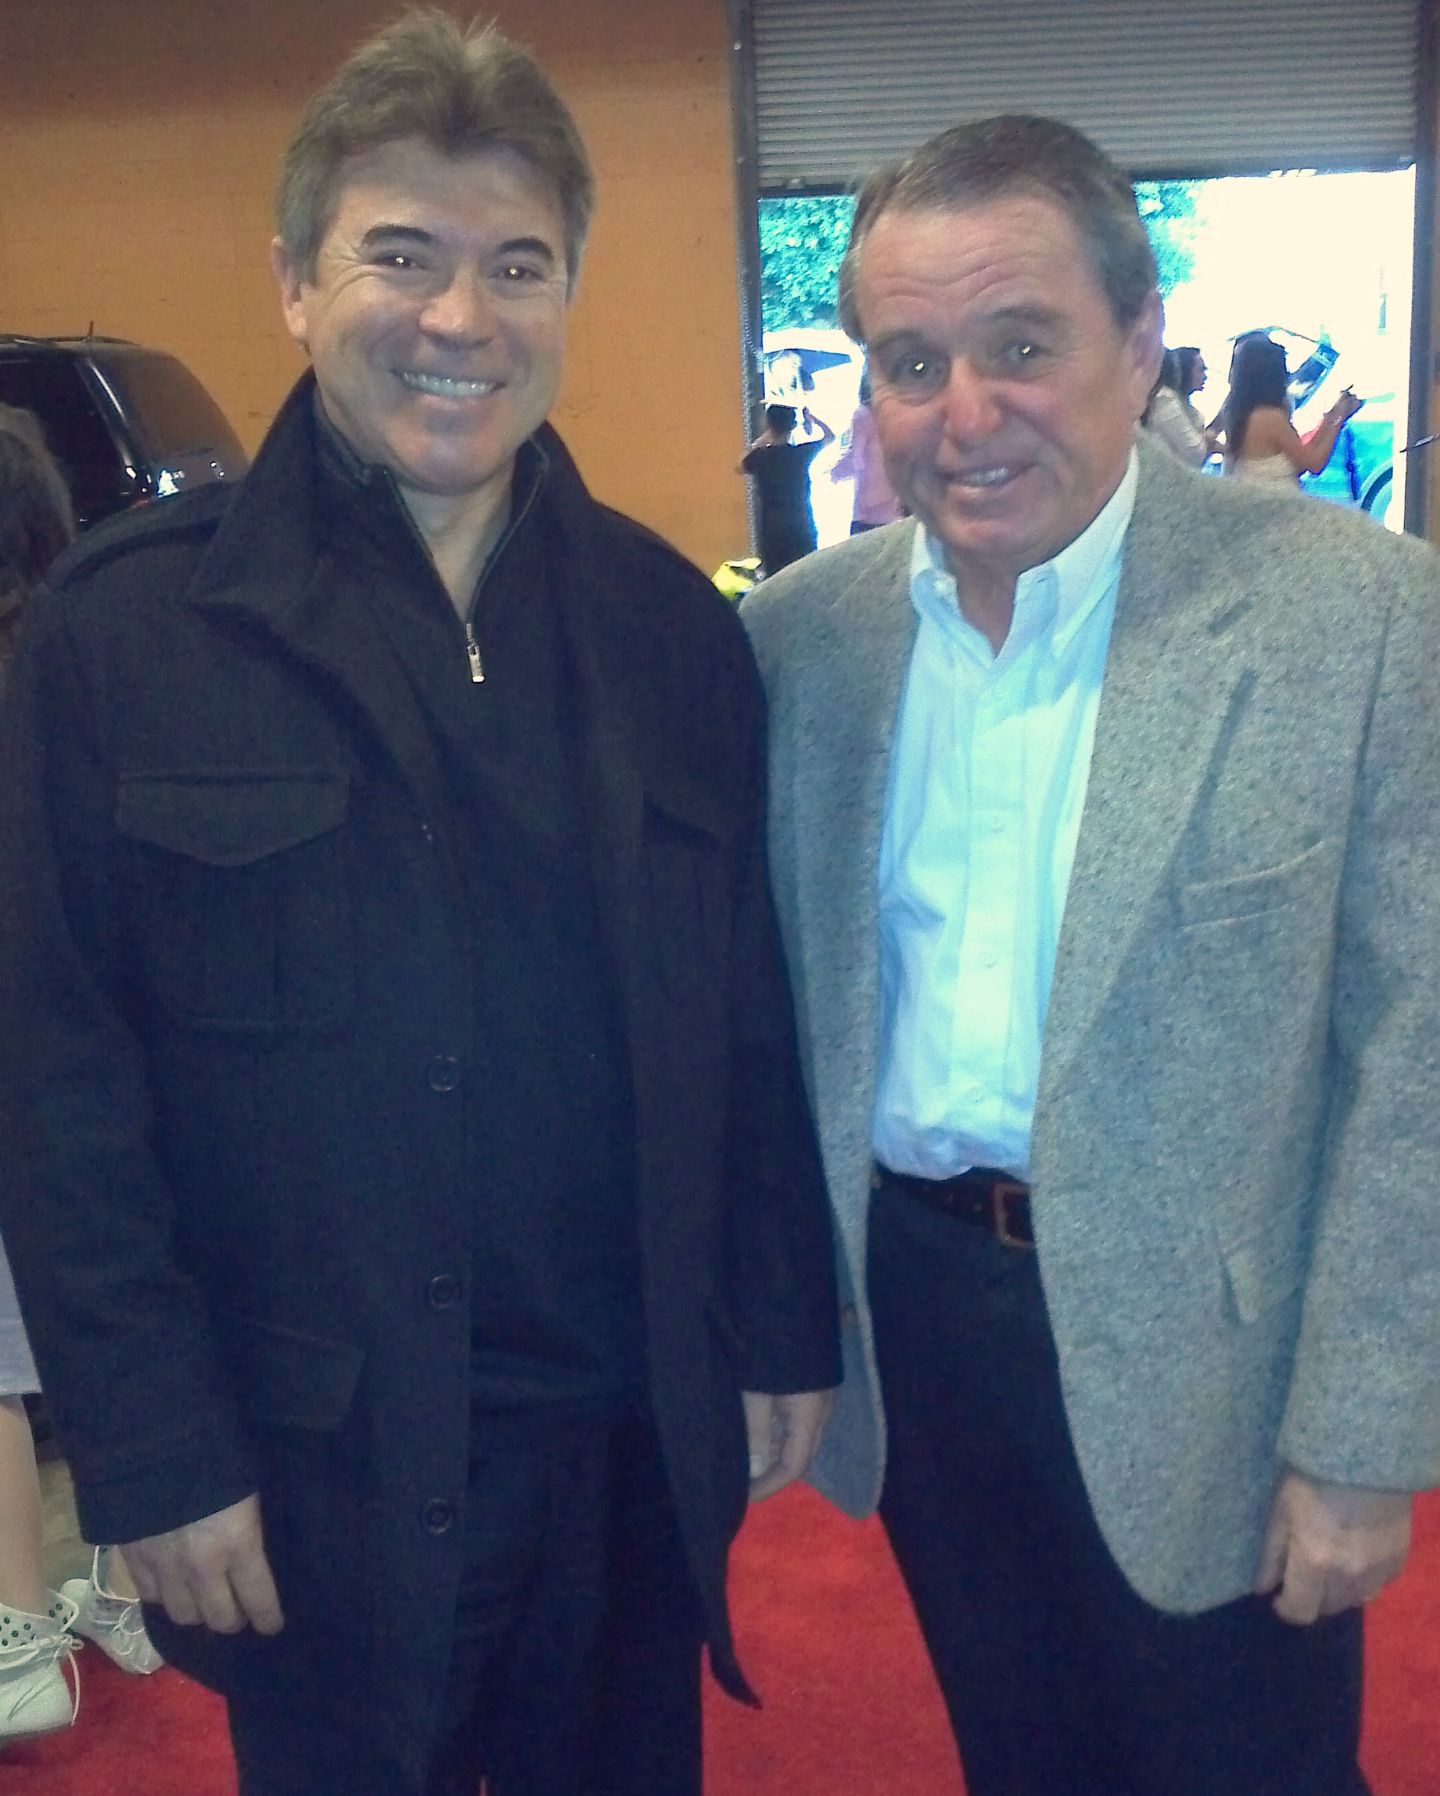 Art Bonilla and Jerry Mathers...as THE BEAVER!